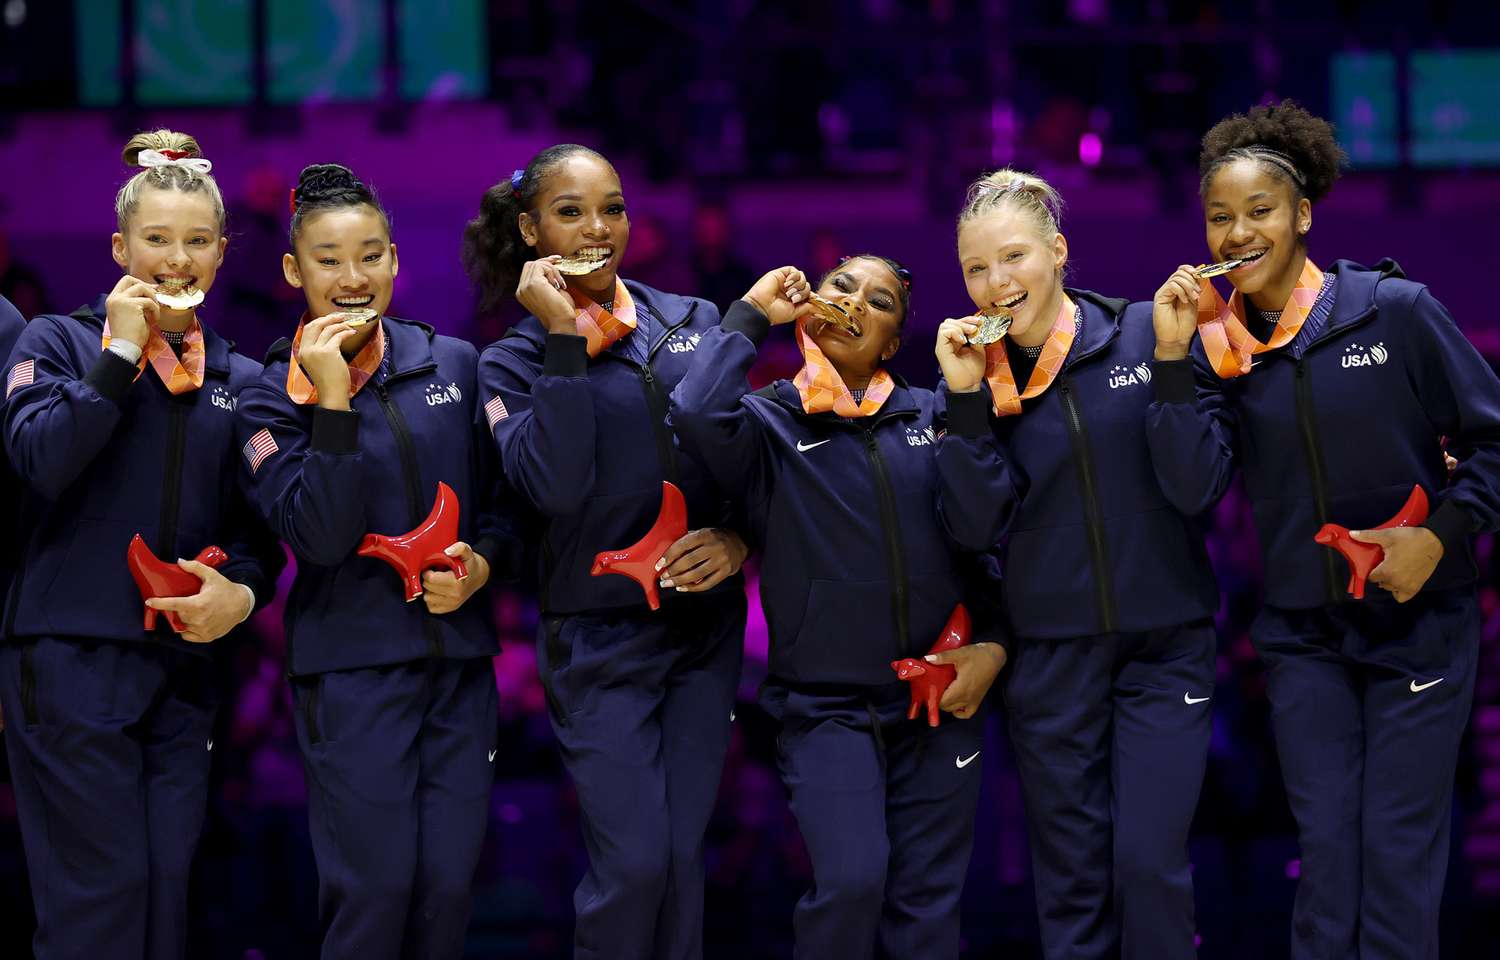 23-facts-about-usa-gymnastics